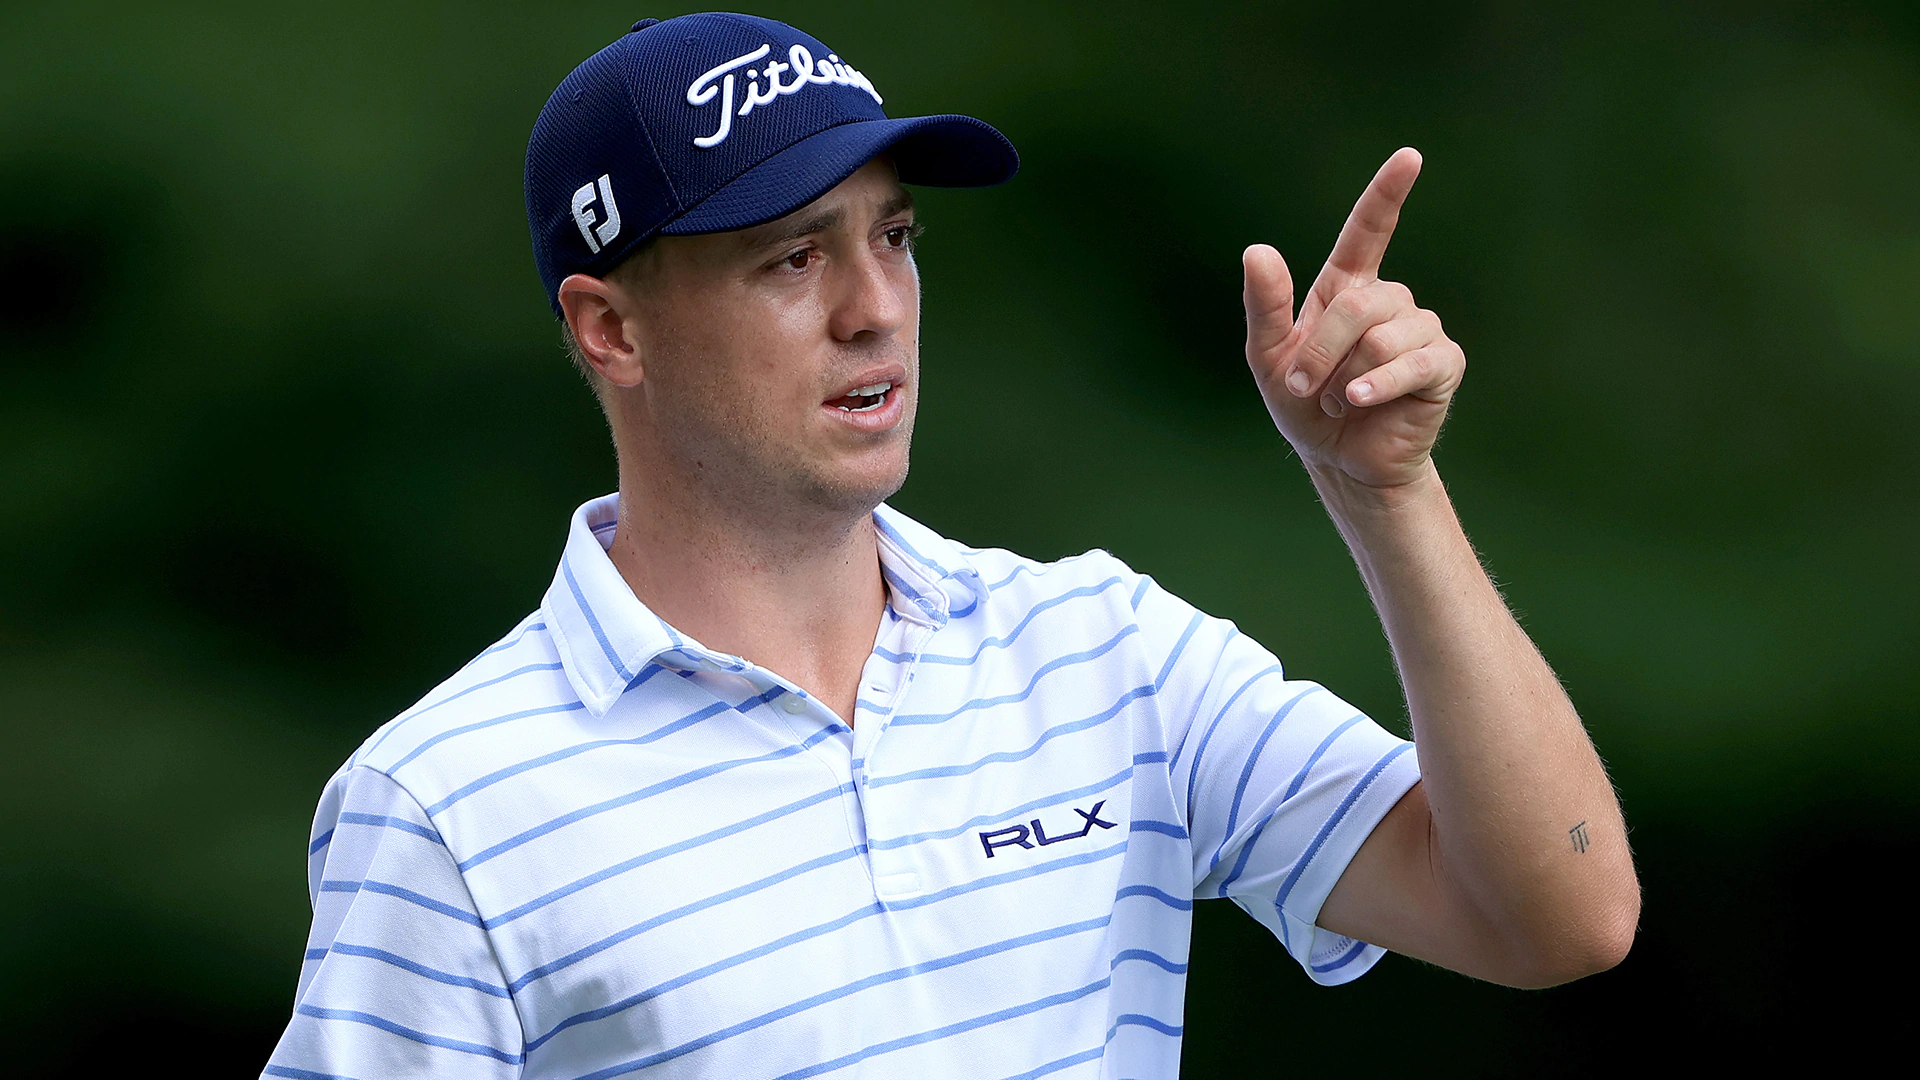 Flawless Justin Thomas leads younger stars through 54 holes at Workday Charity Open